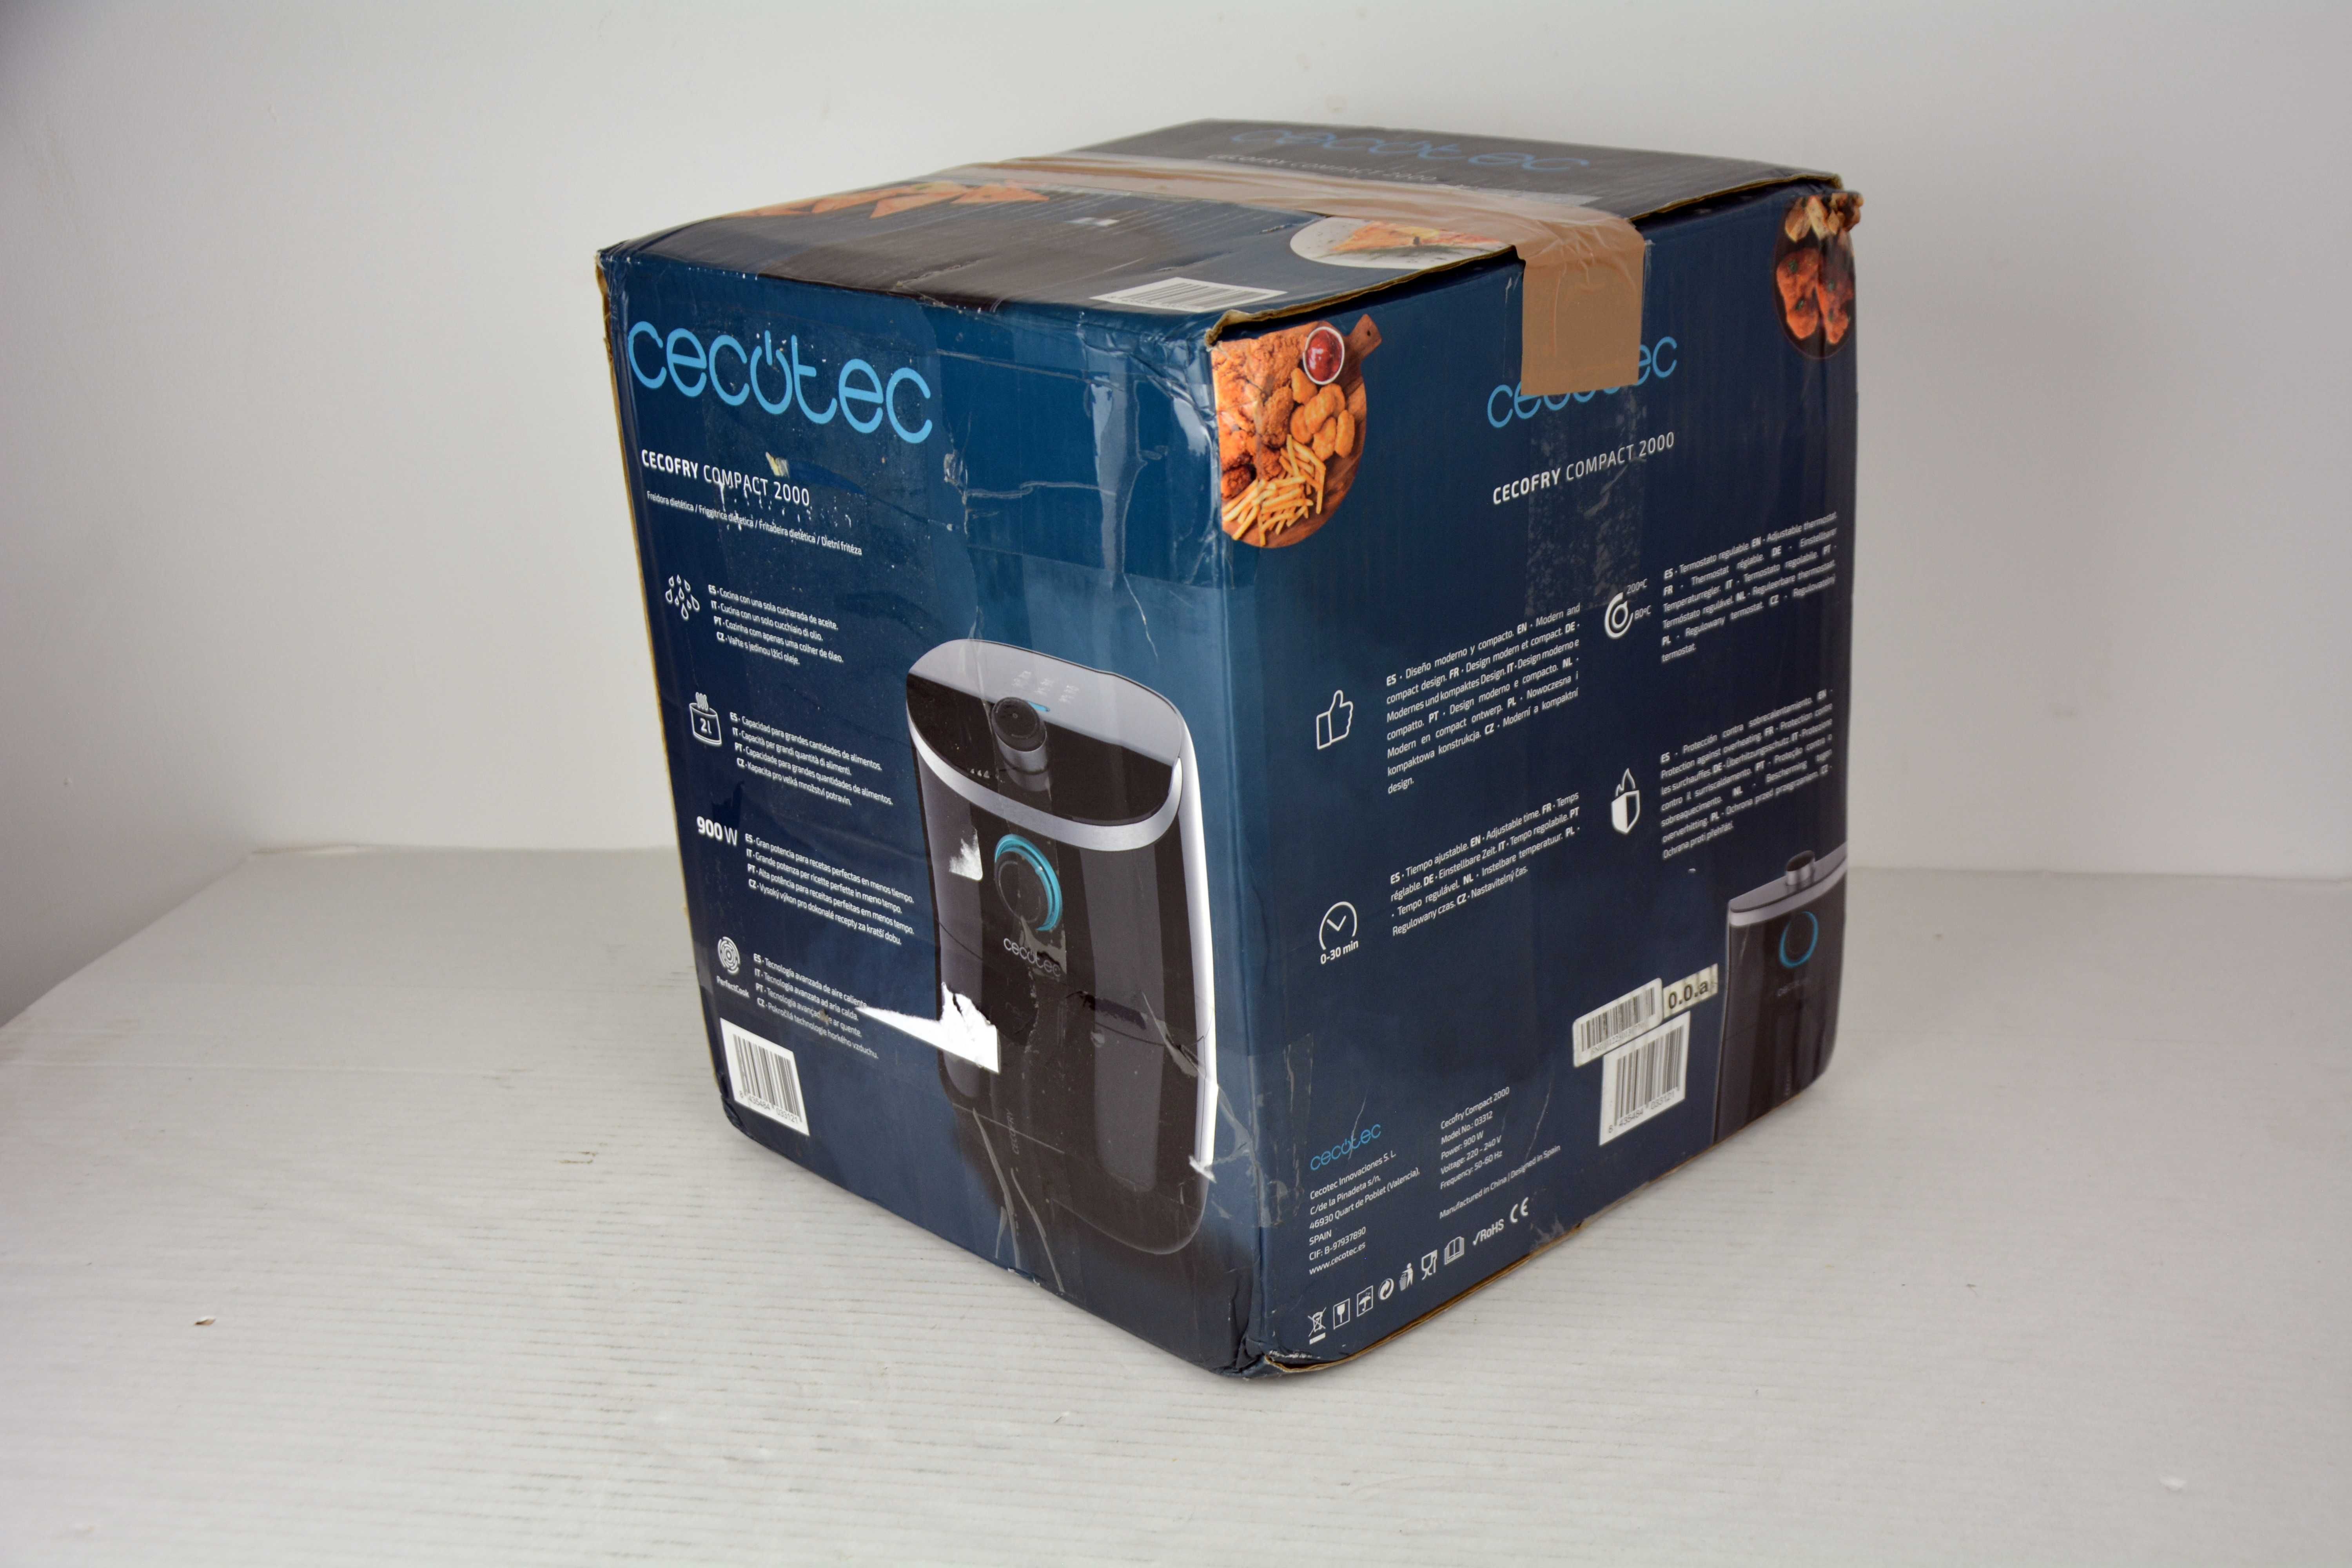 Frytkownica air fryer Cecotec Cecofry Compact 2000